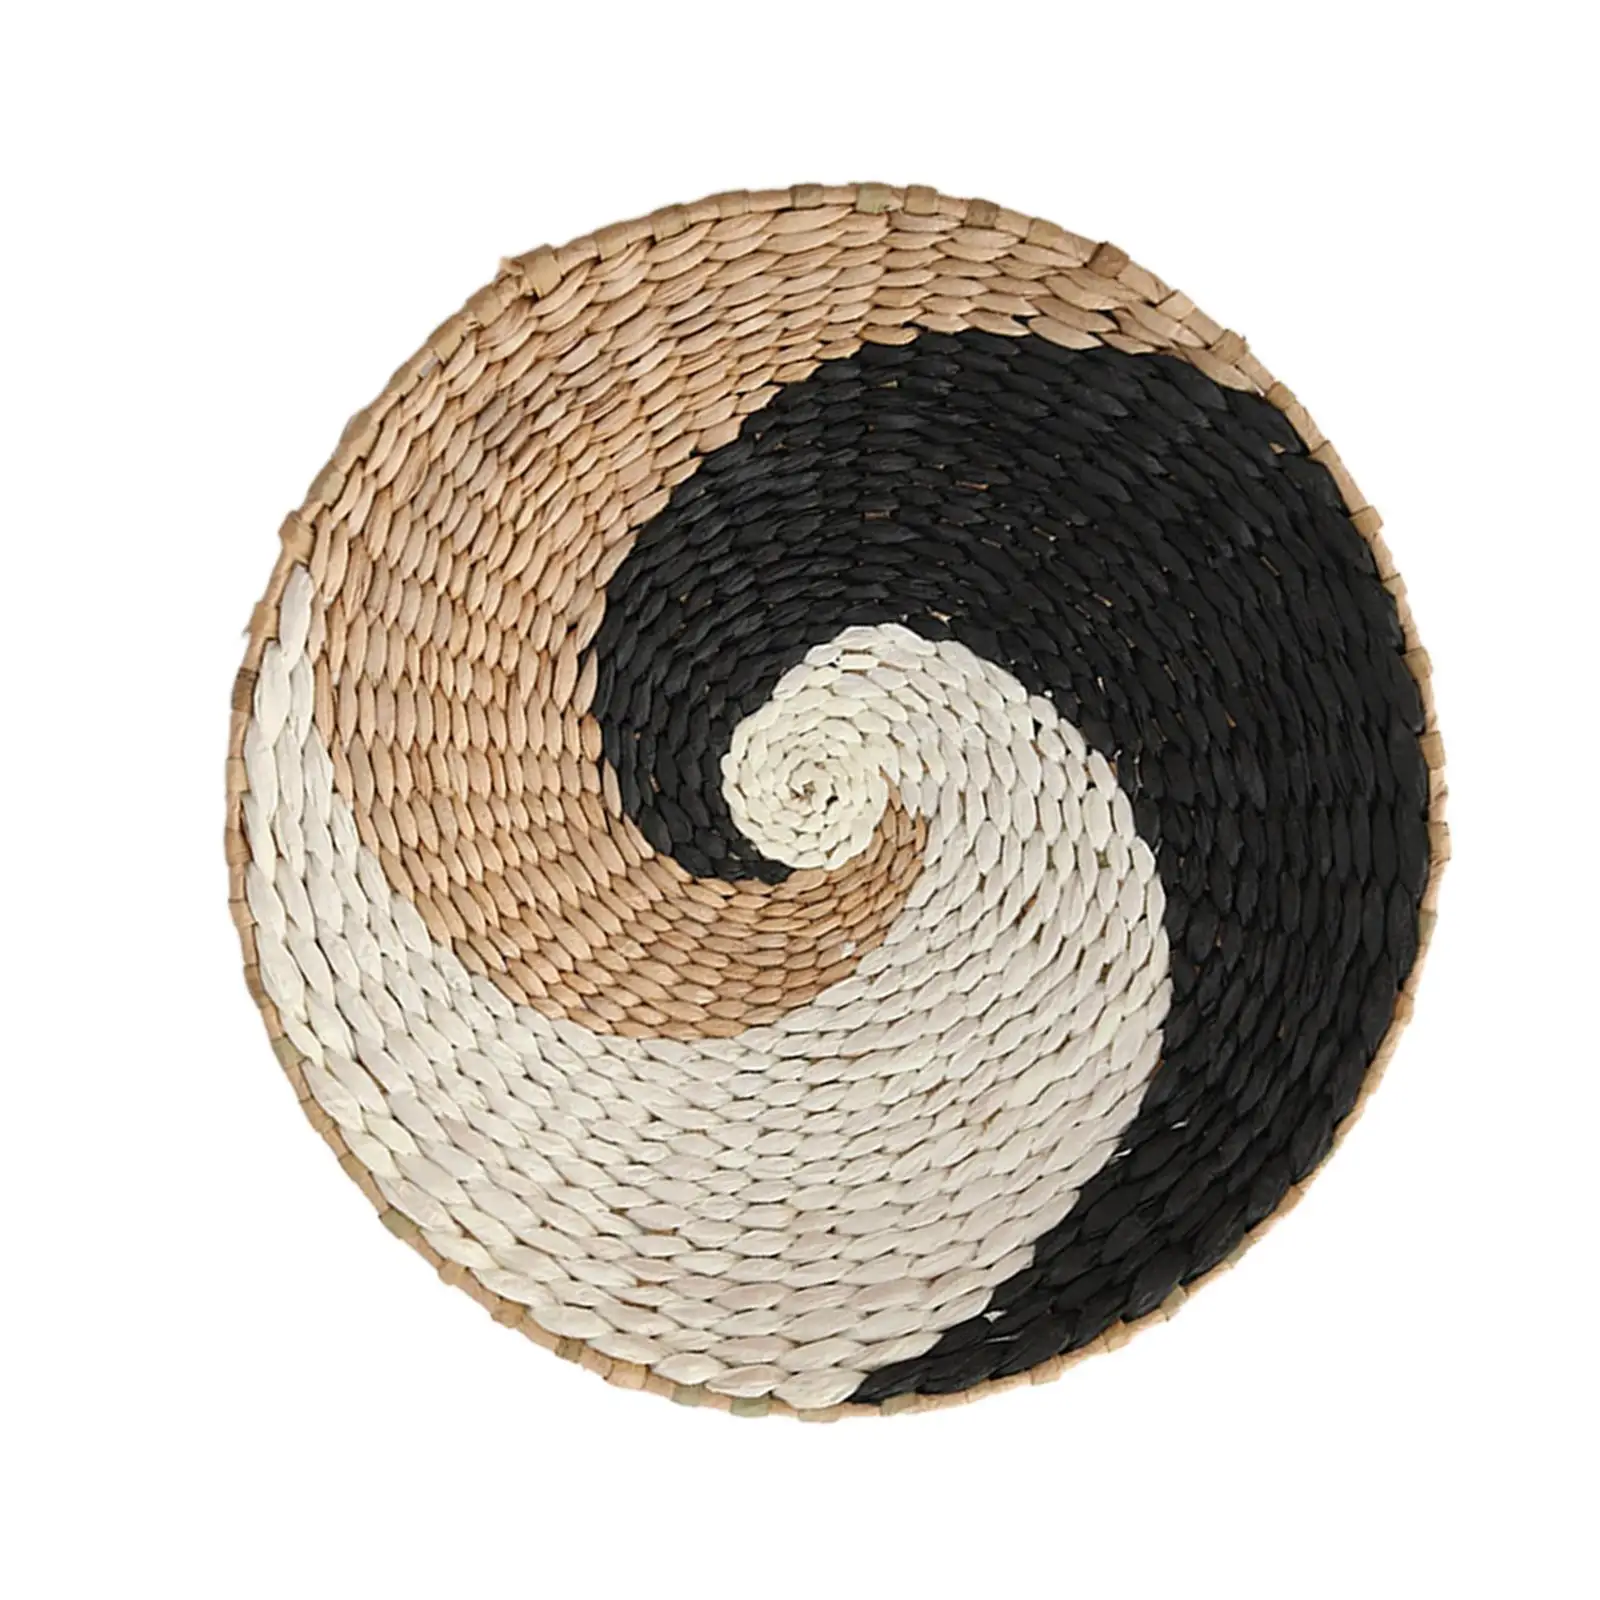 Pendant Wall Decor Grass Pastoral Rustic Weave Pattern Decoration for Porch Wall